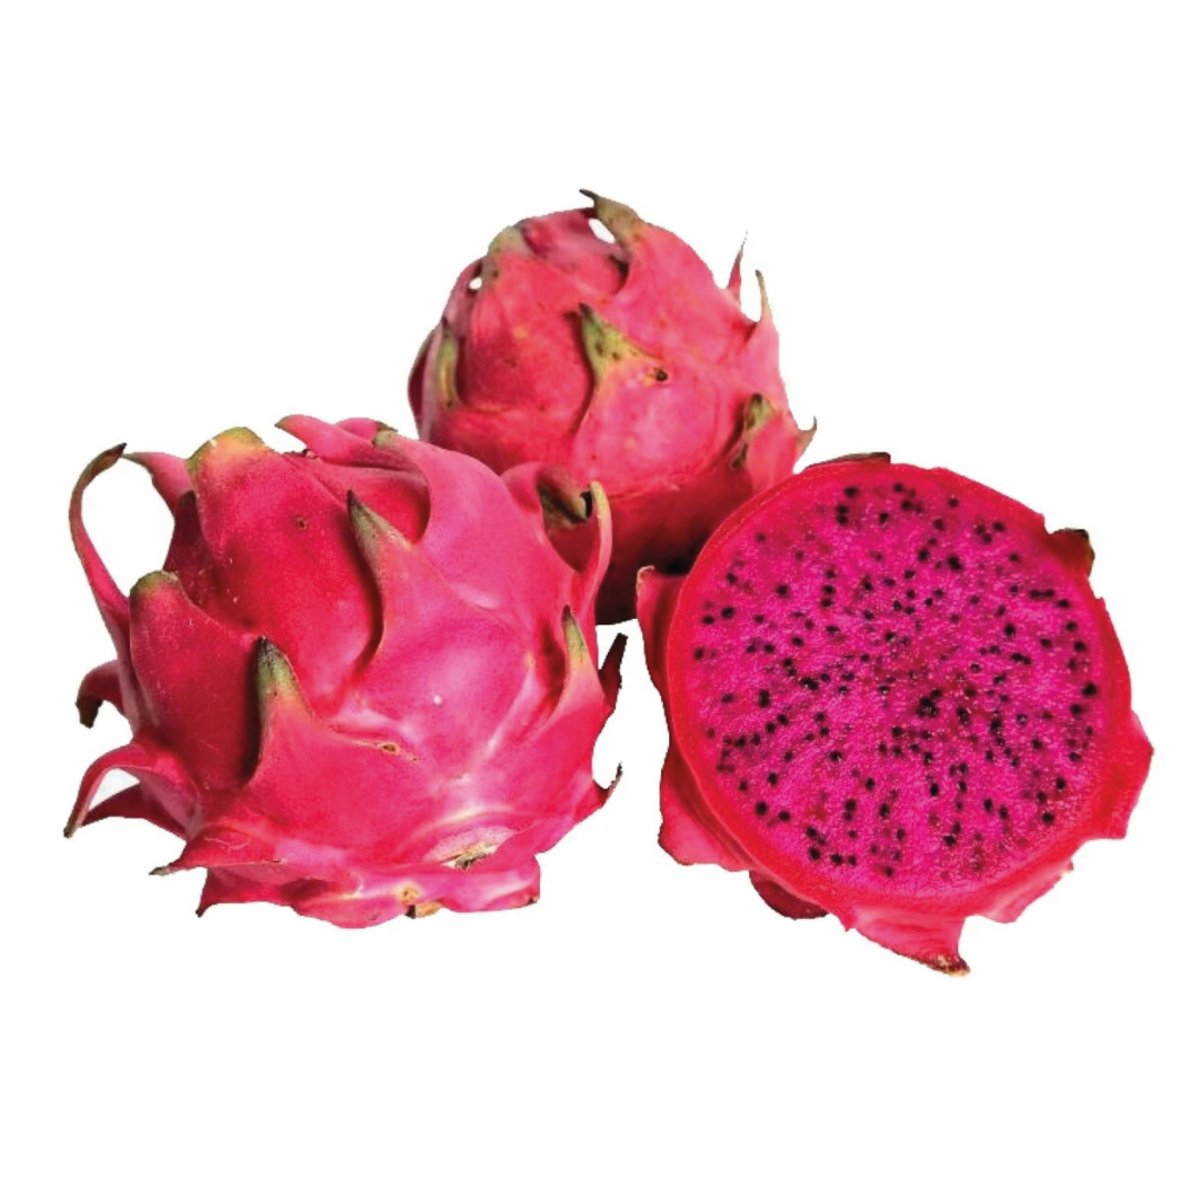 Red Dragon Fruit 500g Approx Weight